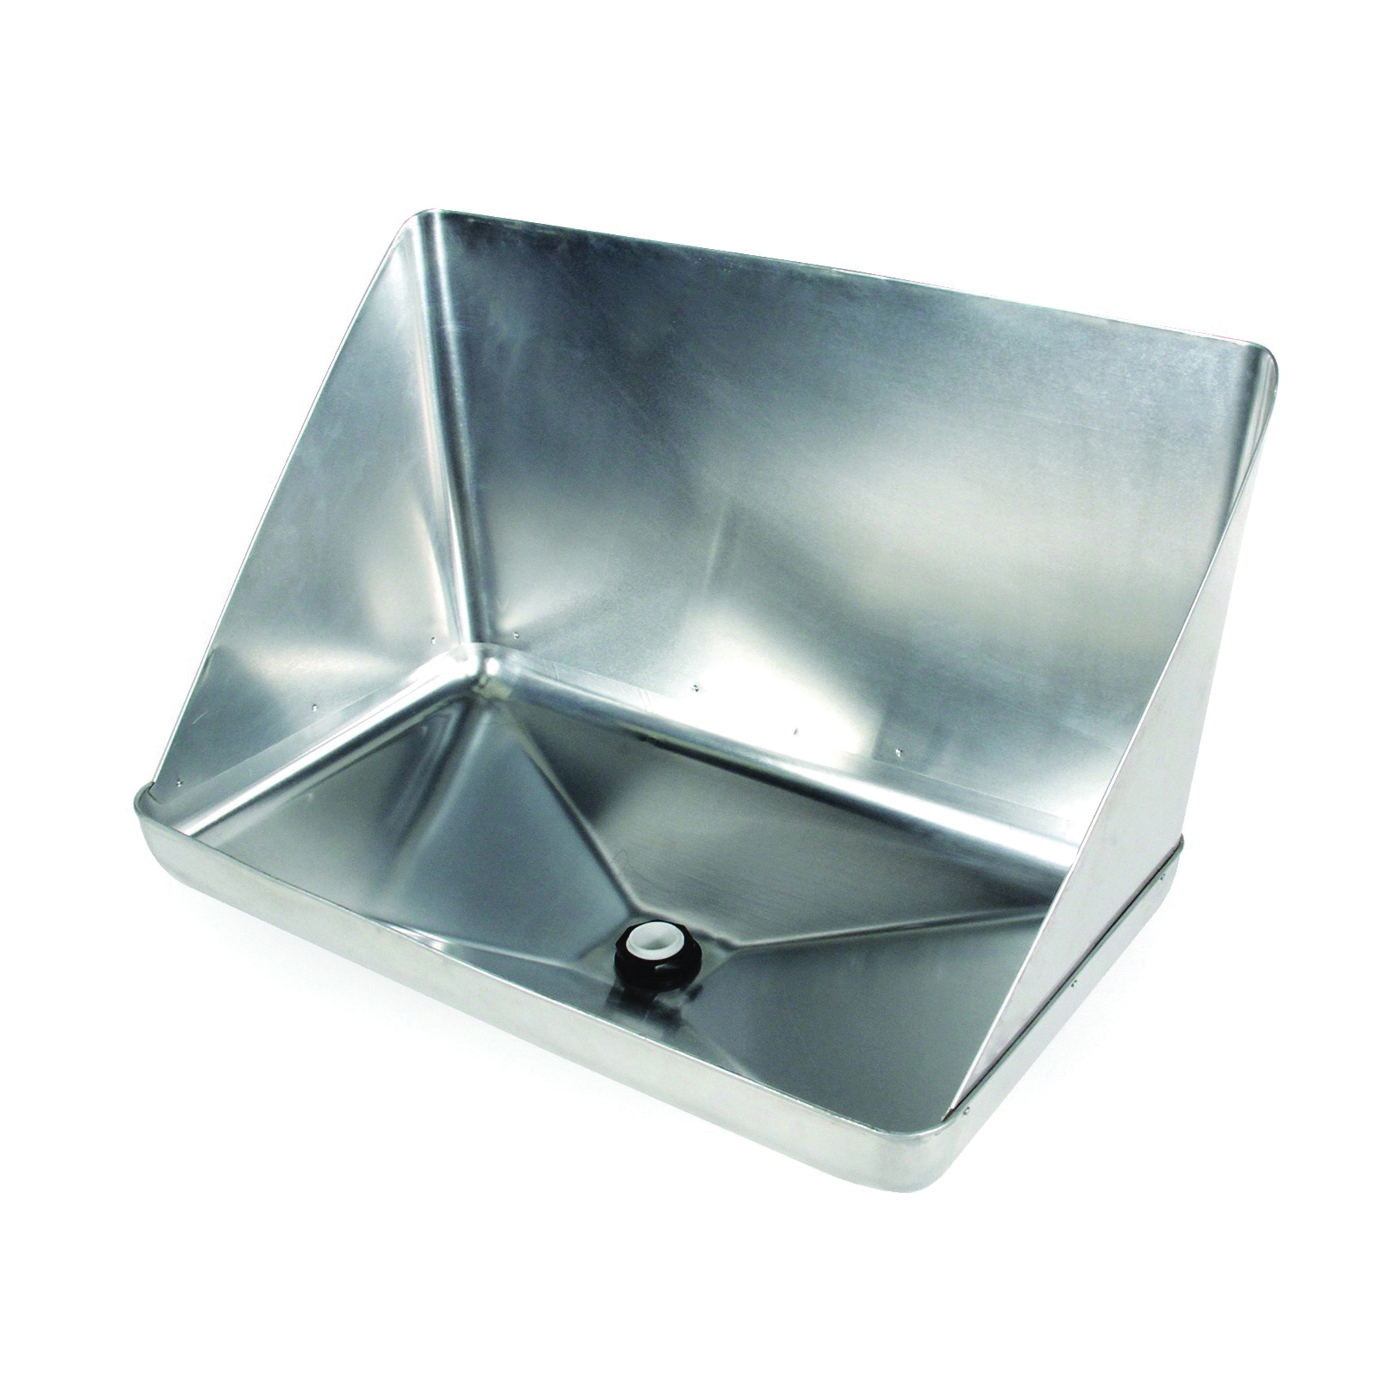 11430 Water Heater Drain Pan, Aluminum, For: 20-1/2 in W x 13 in D Gas or Electric Tankless Water Heaters